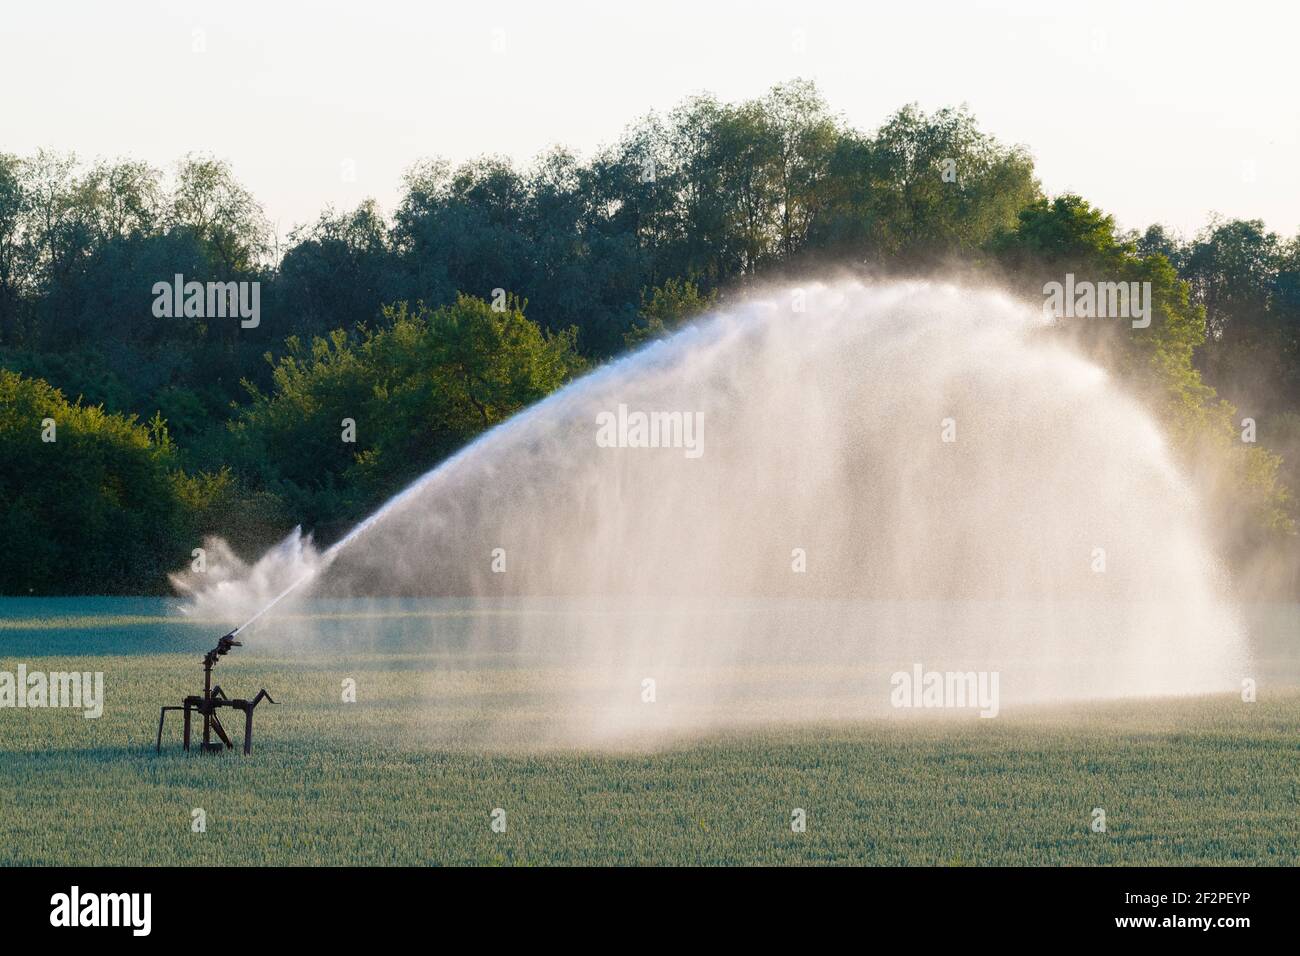 Irrigation system on a grain field, June, Hesse, Germany Stock Photo